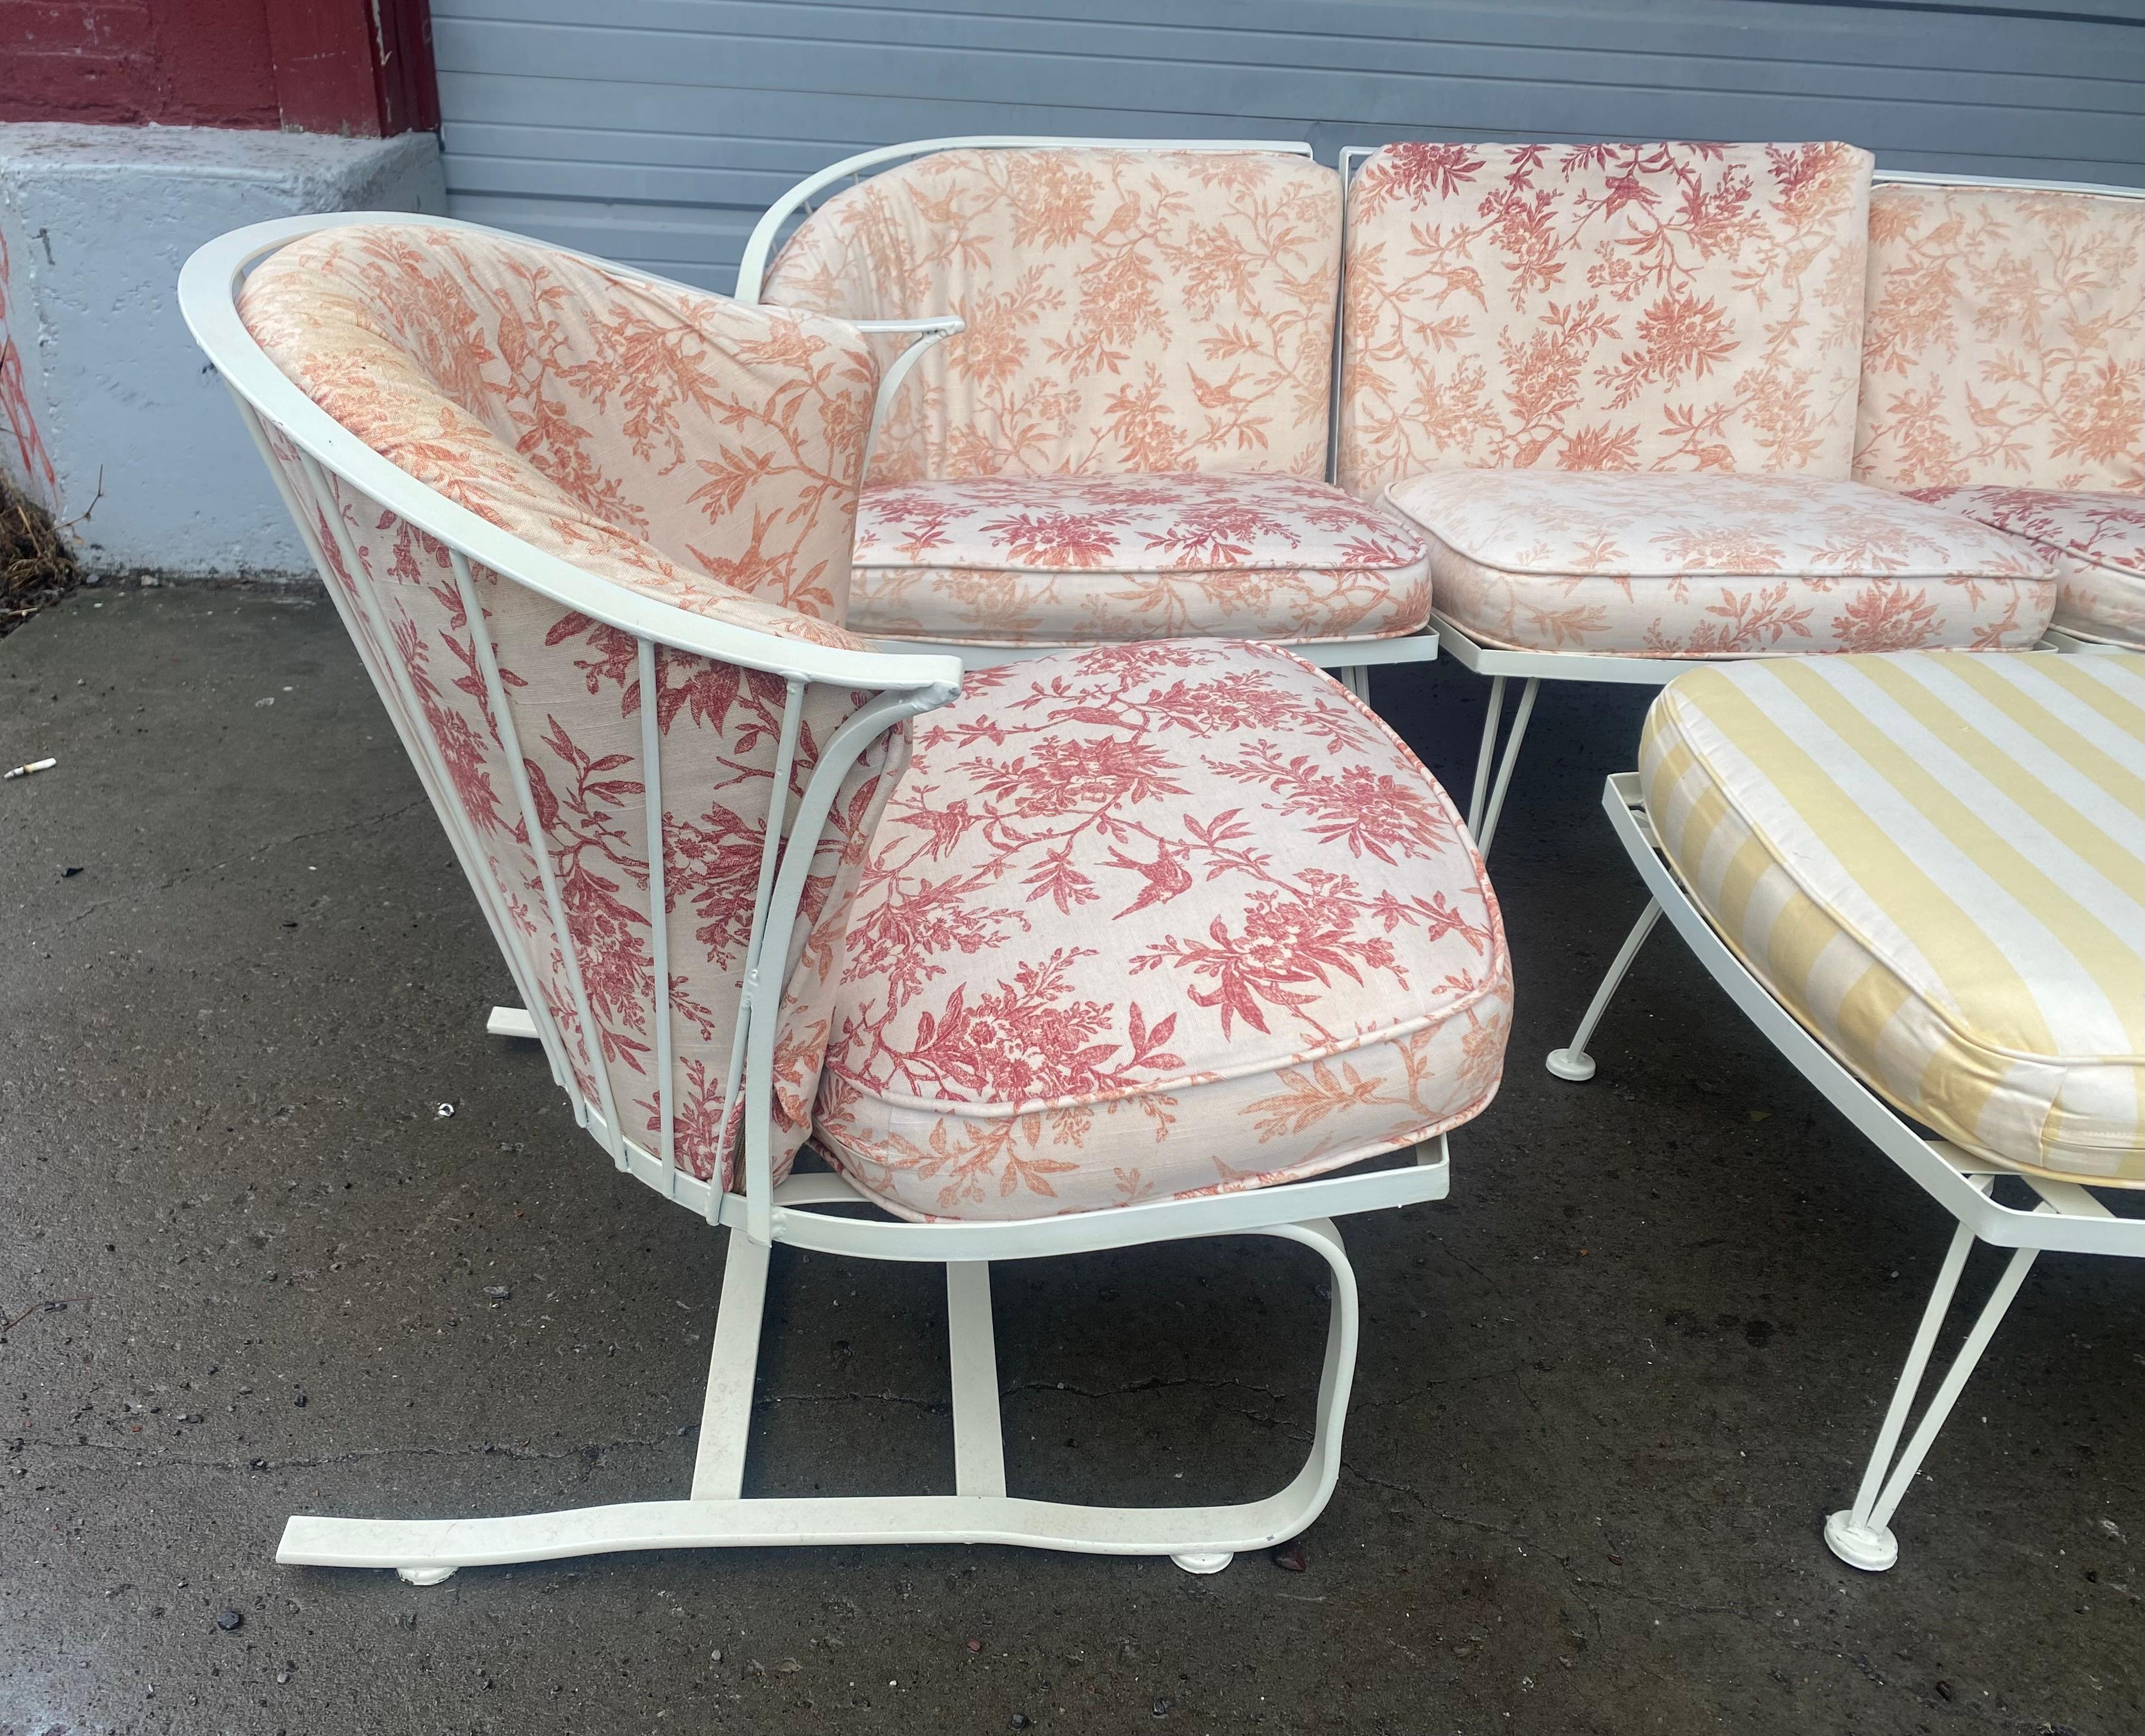 Set of 1950's Pinecrest Lounge Seating by Woodard, , rare springer chair & ottoman 2